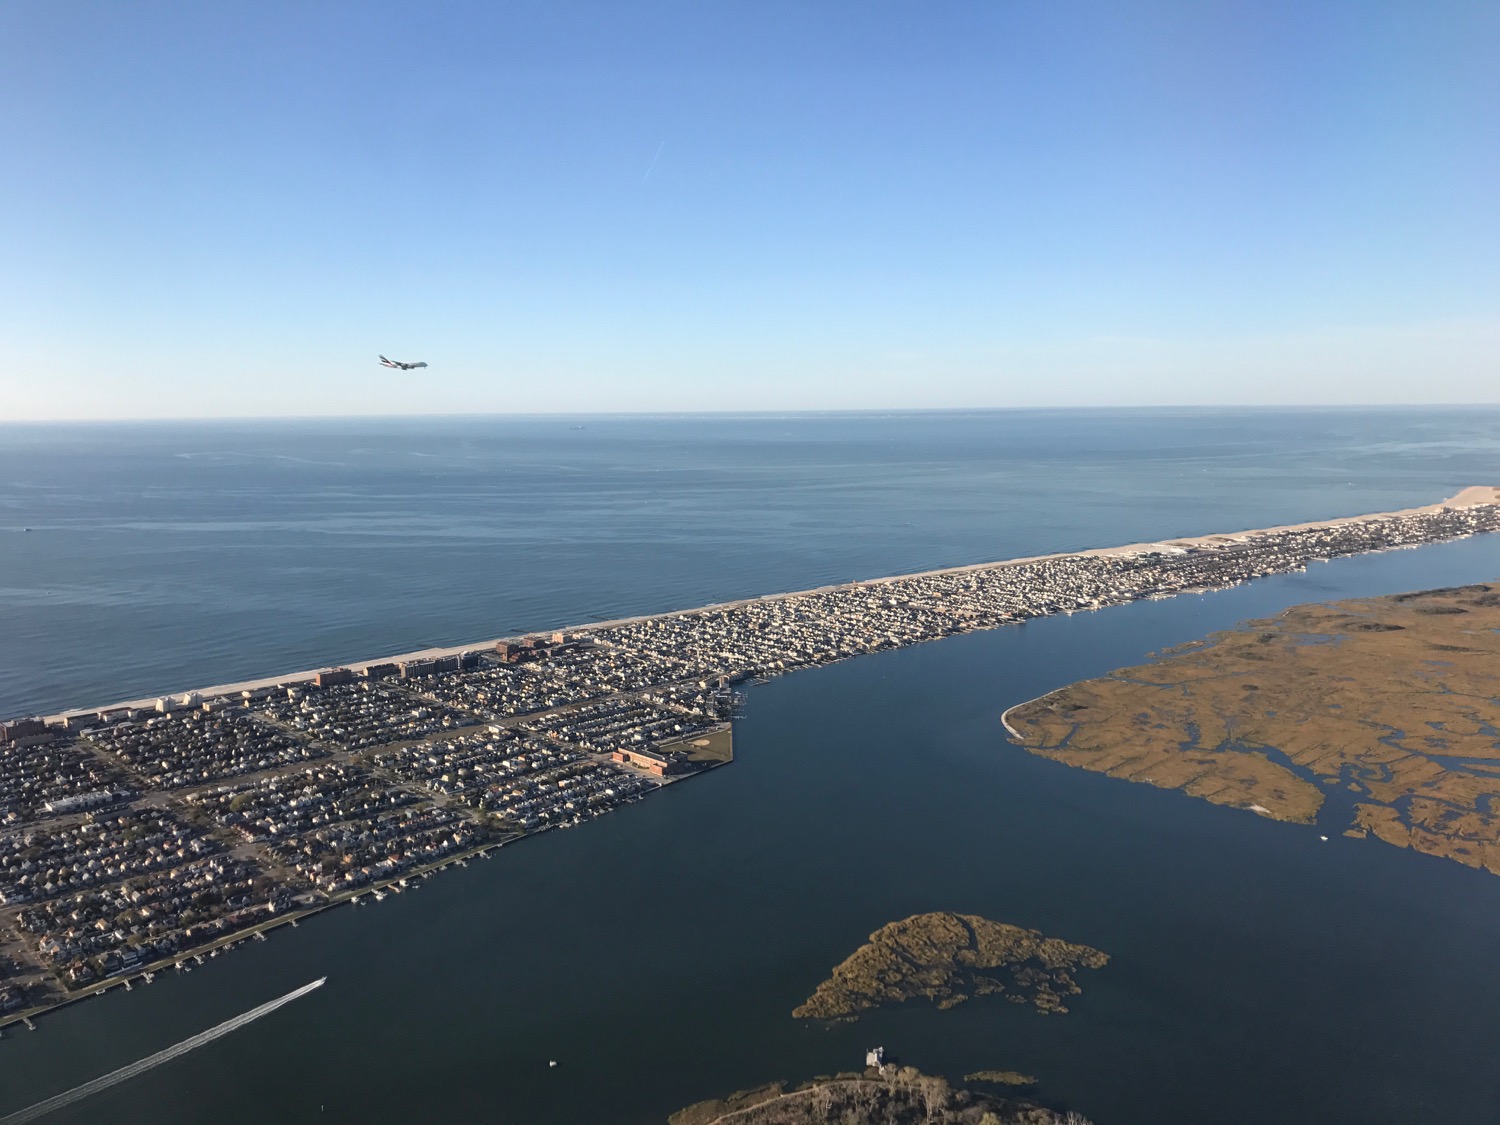 an airplane flying over a body of water